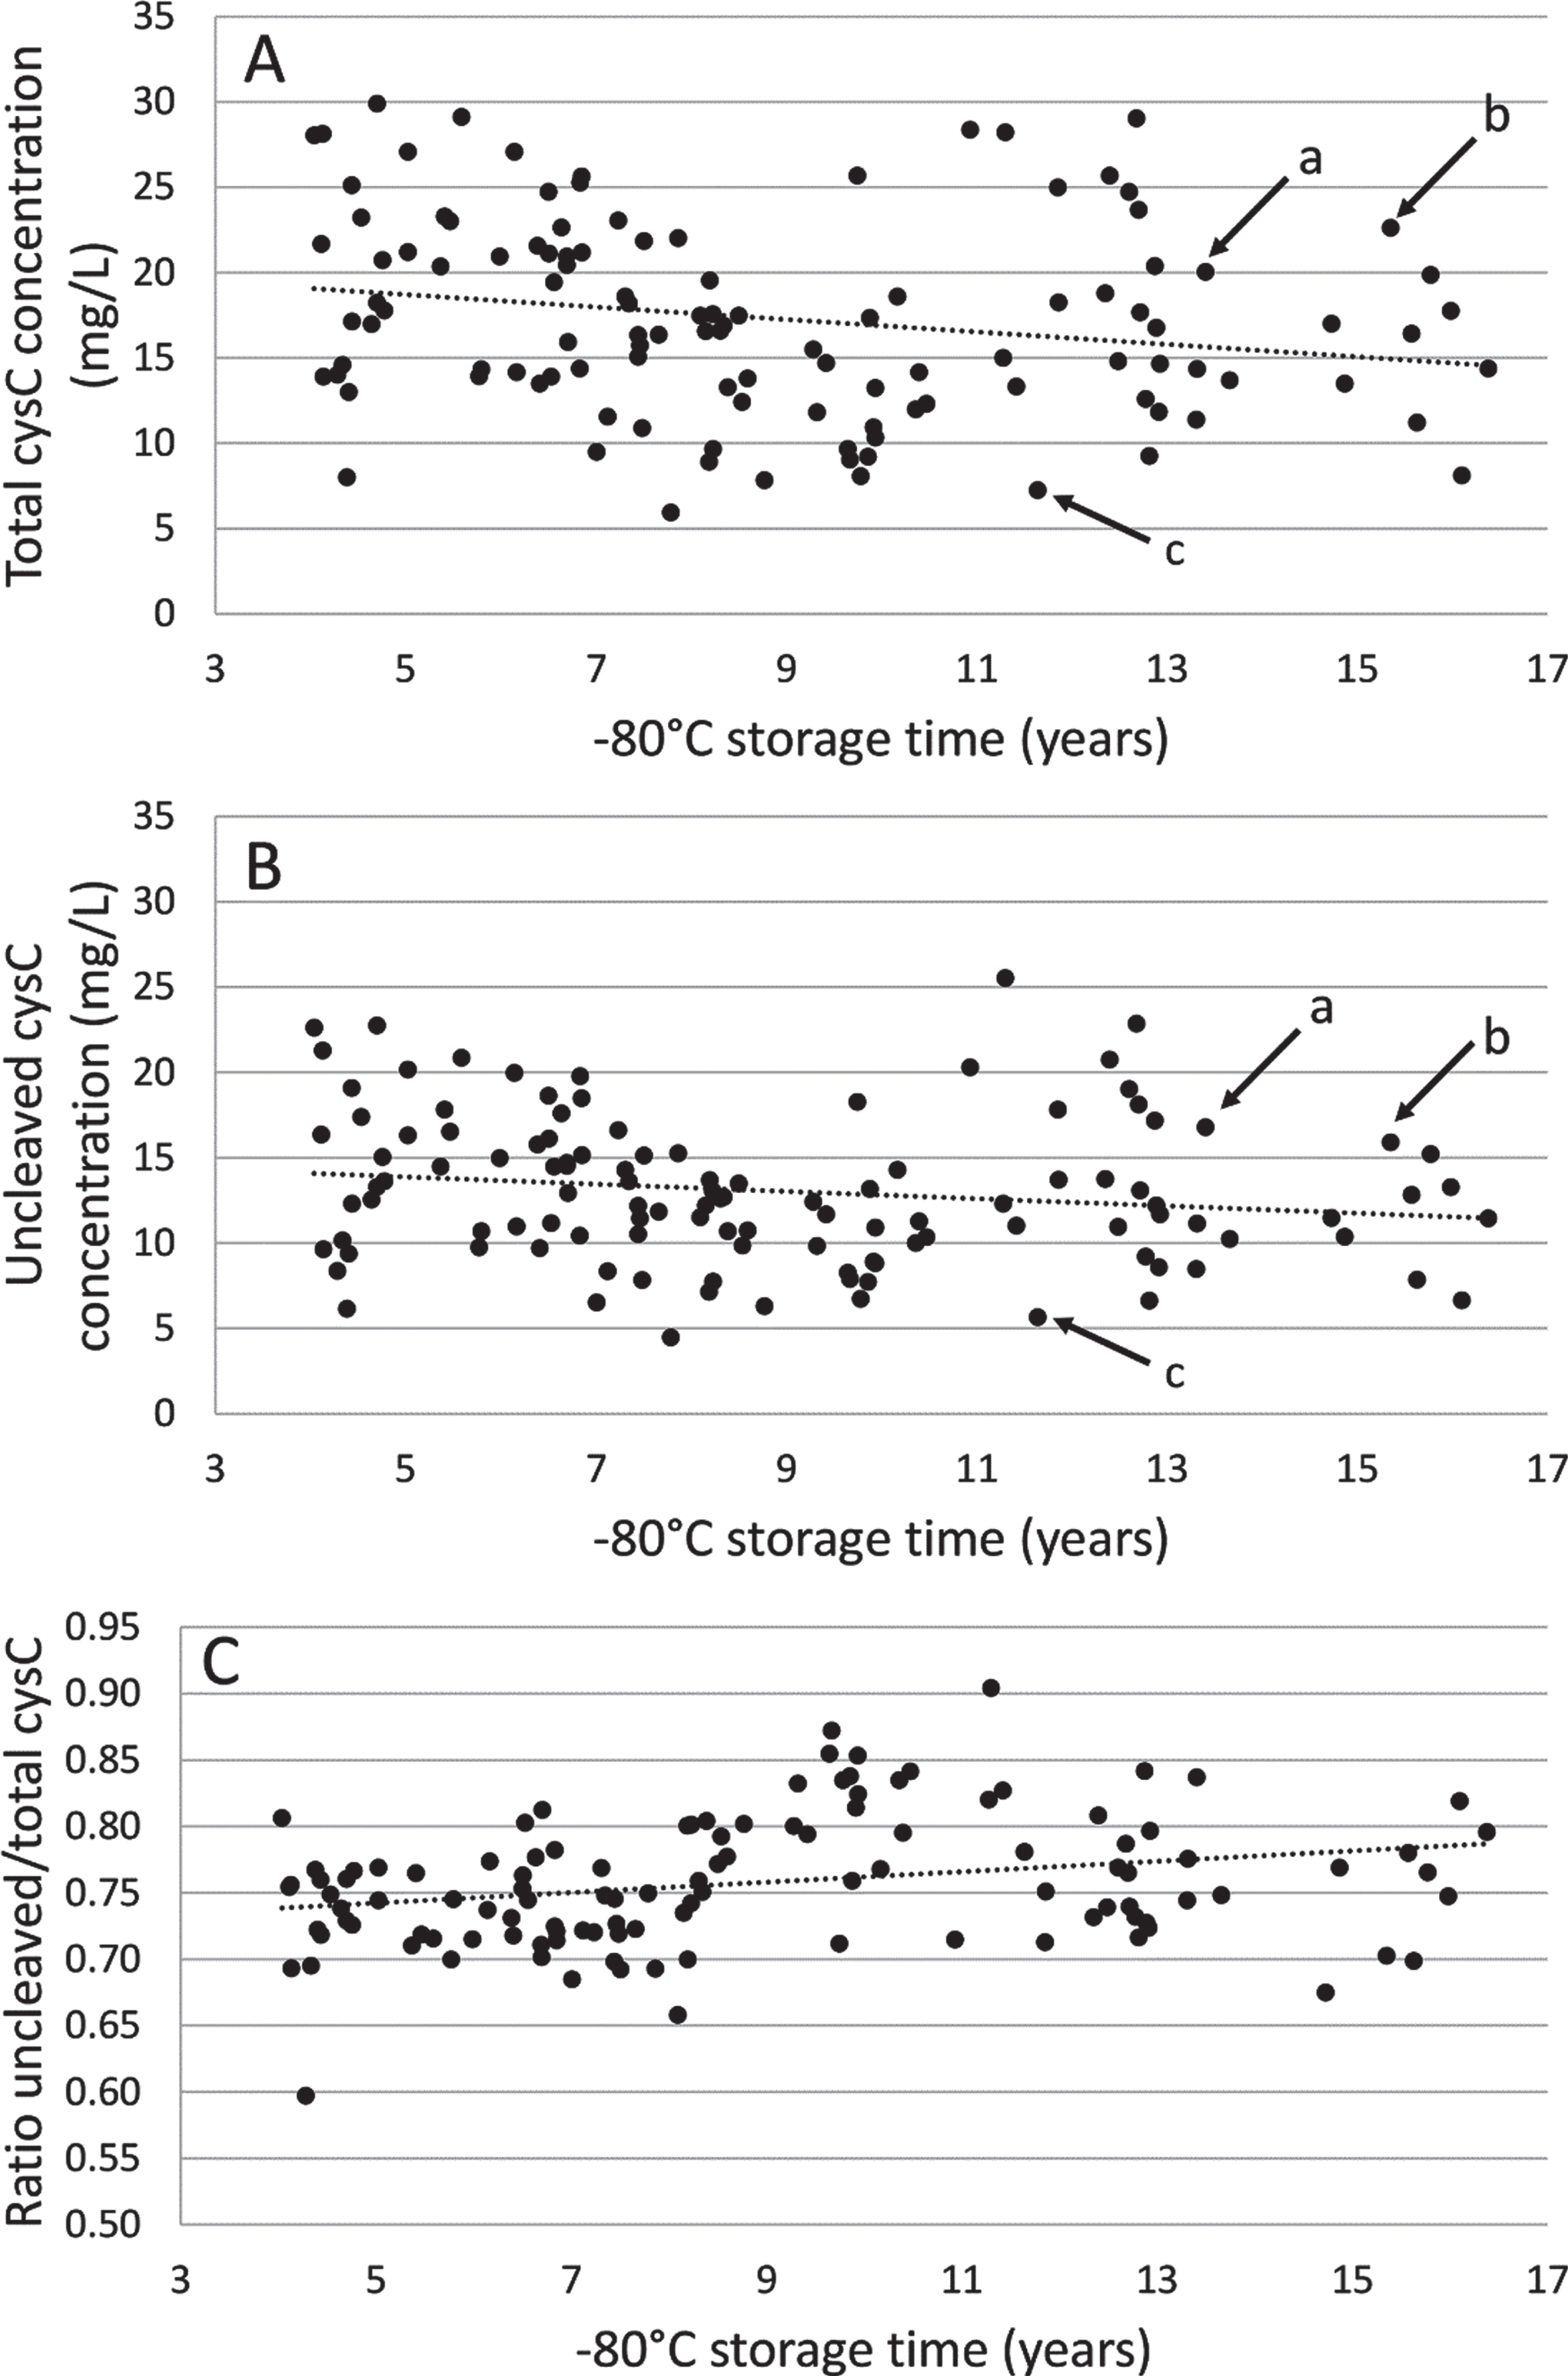 Long-term –80°C storage stability study of total (A) and uncleaved (B) cystatin C concentration and ratio (C) using 116 Alzheimer’s disease patient CSF samples. Dotted line indicates linear trend line. The arrows indicate the concentrations in three selected samples (a, b, and c), showing the similar pattern of distribution of total and uncleaved cystatin C concentrations